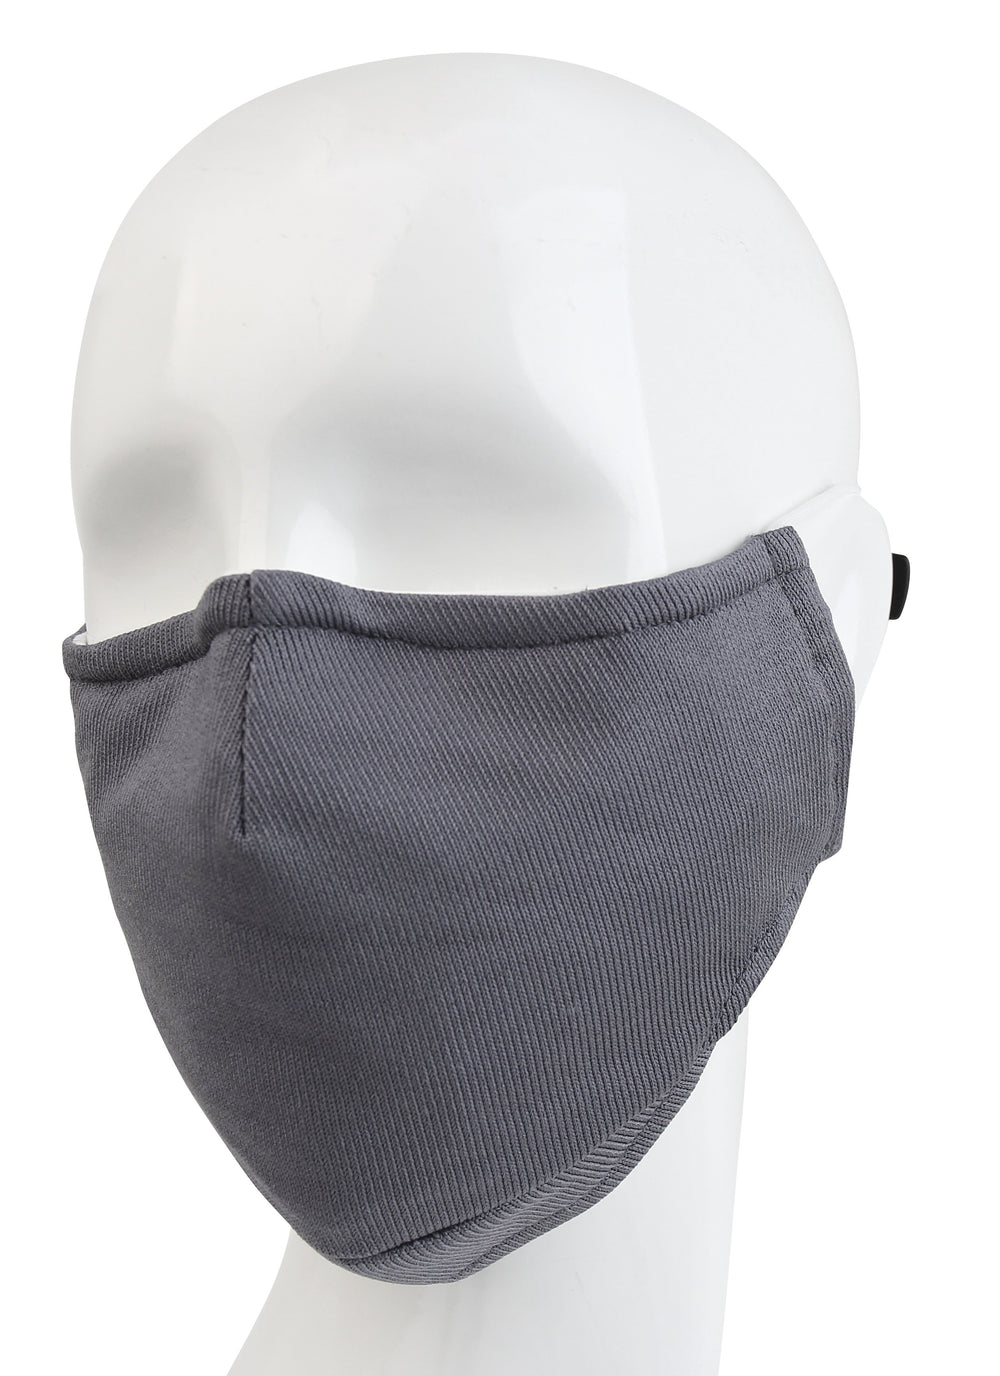 3 Ply Reusable Face Mask, Grey, Large, 3 Pack